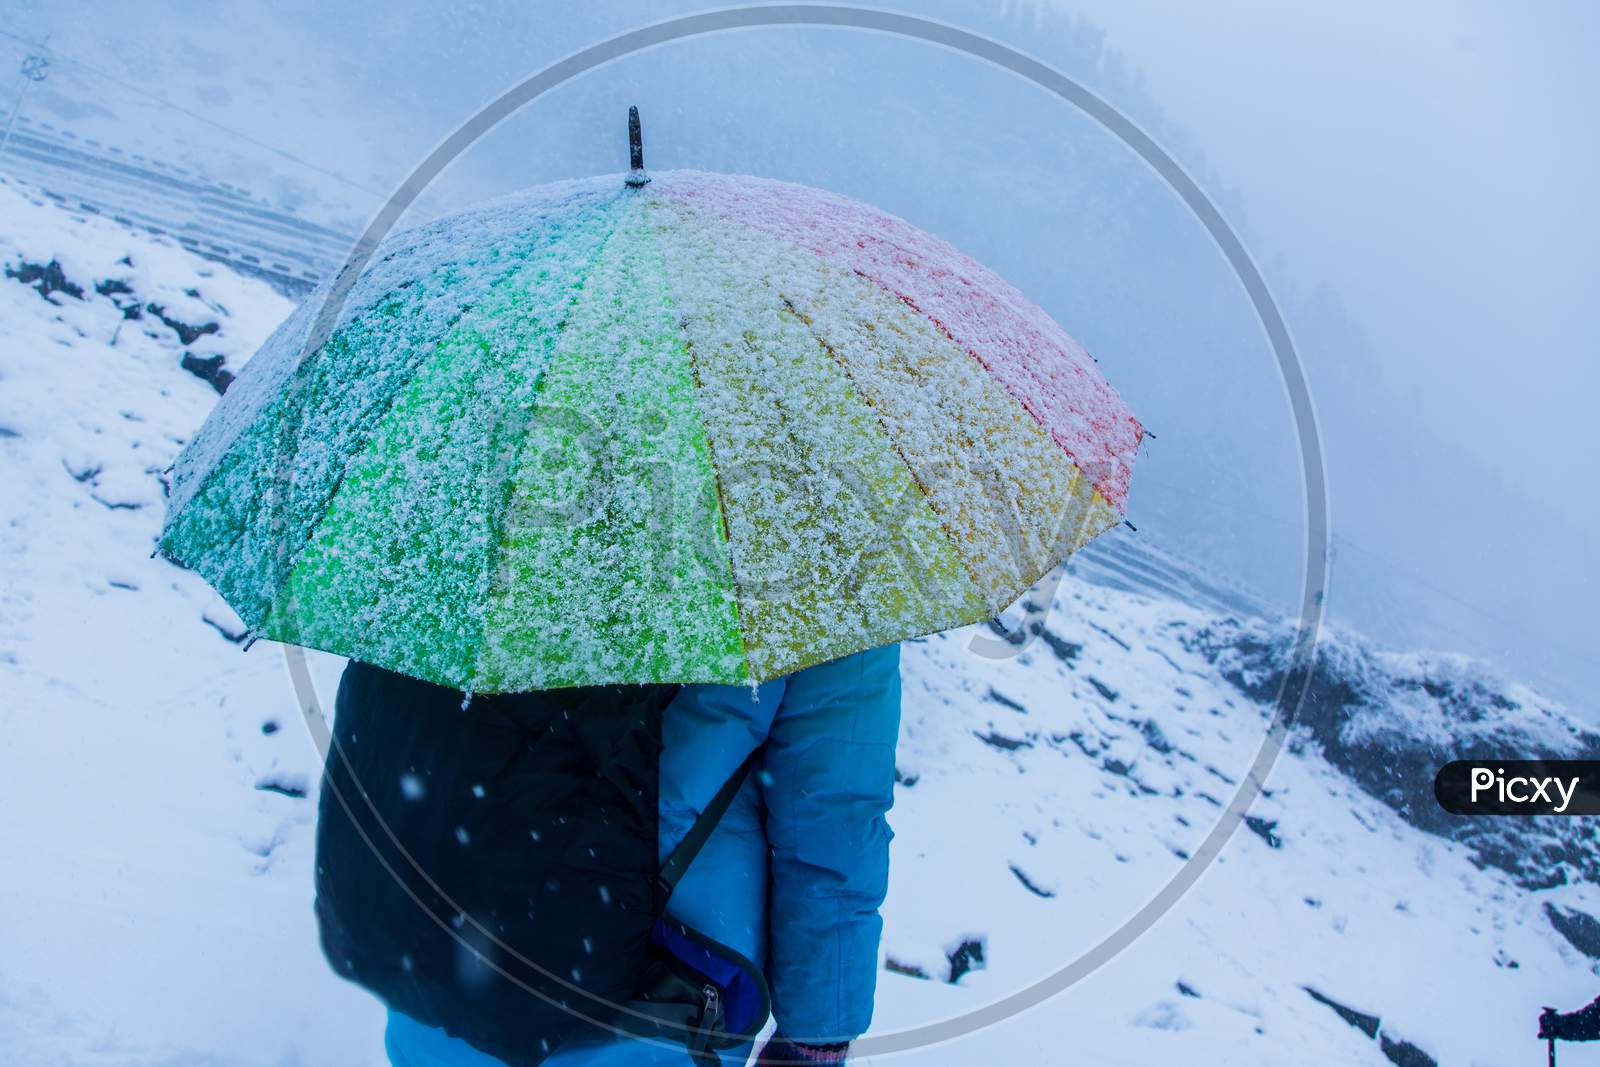 White Landscape And Thick Snow In Winter Looking Frosty And Cold,A Person Standing With Colorful Rainbow Umbrella, Snow Falling, Bad Weather, Background - Image